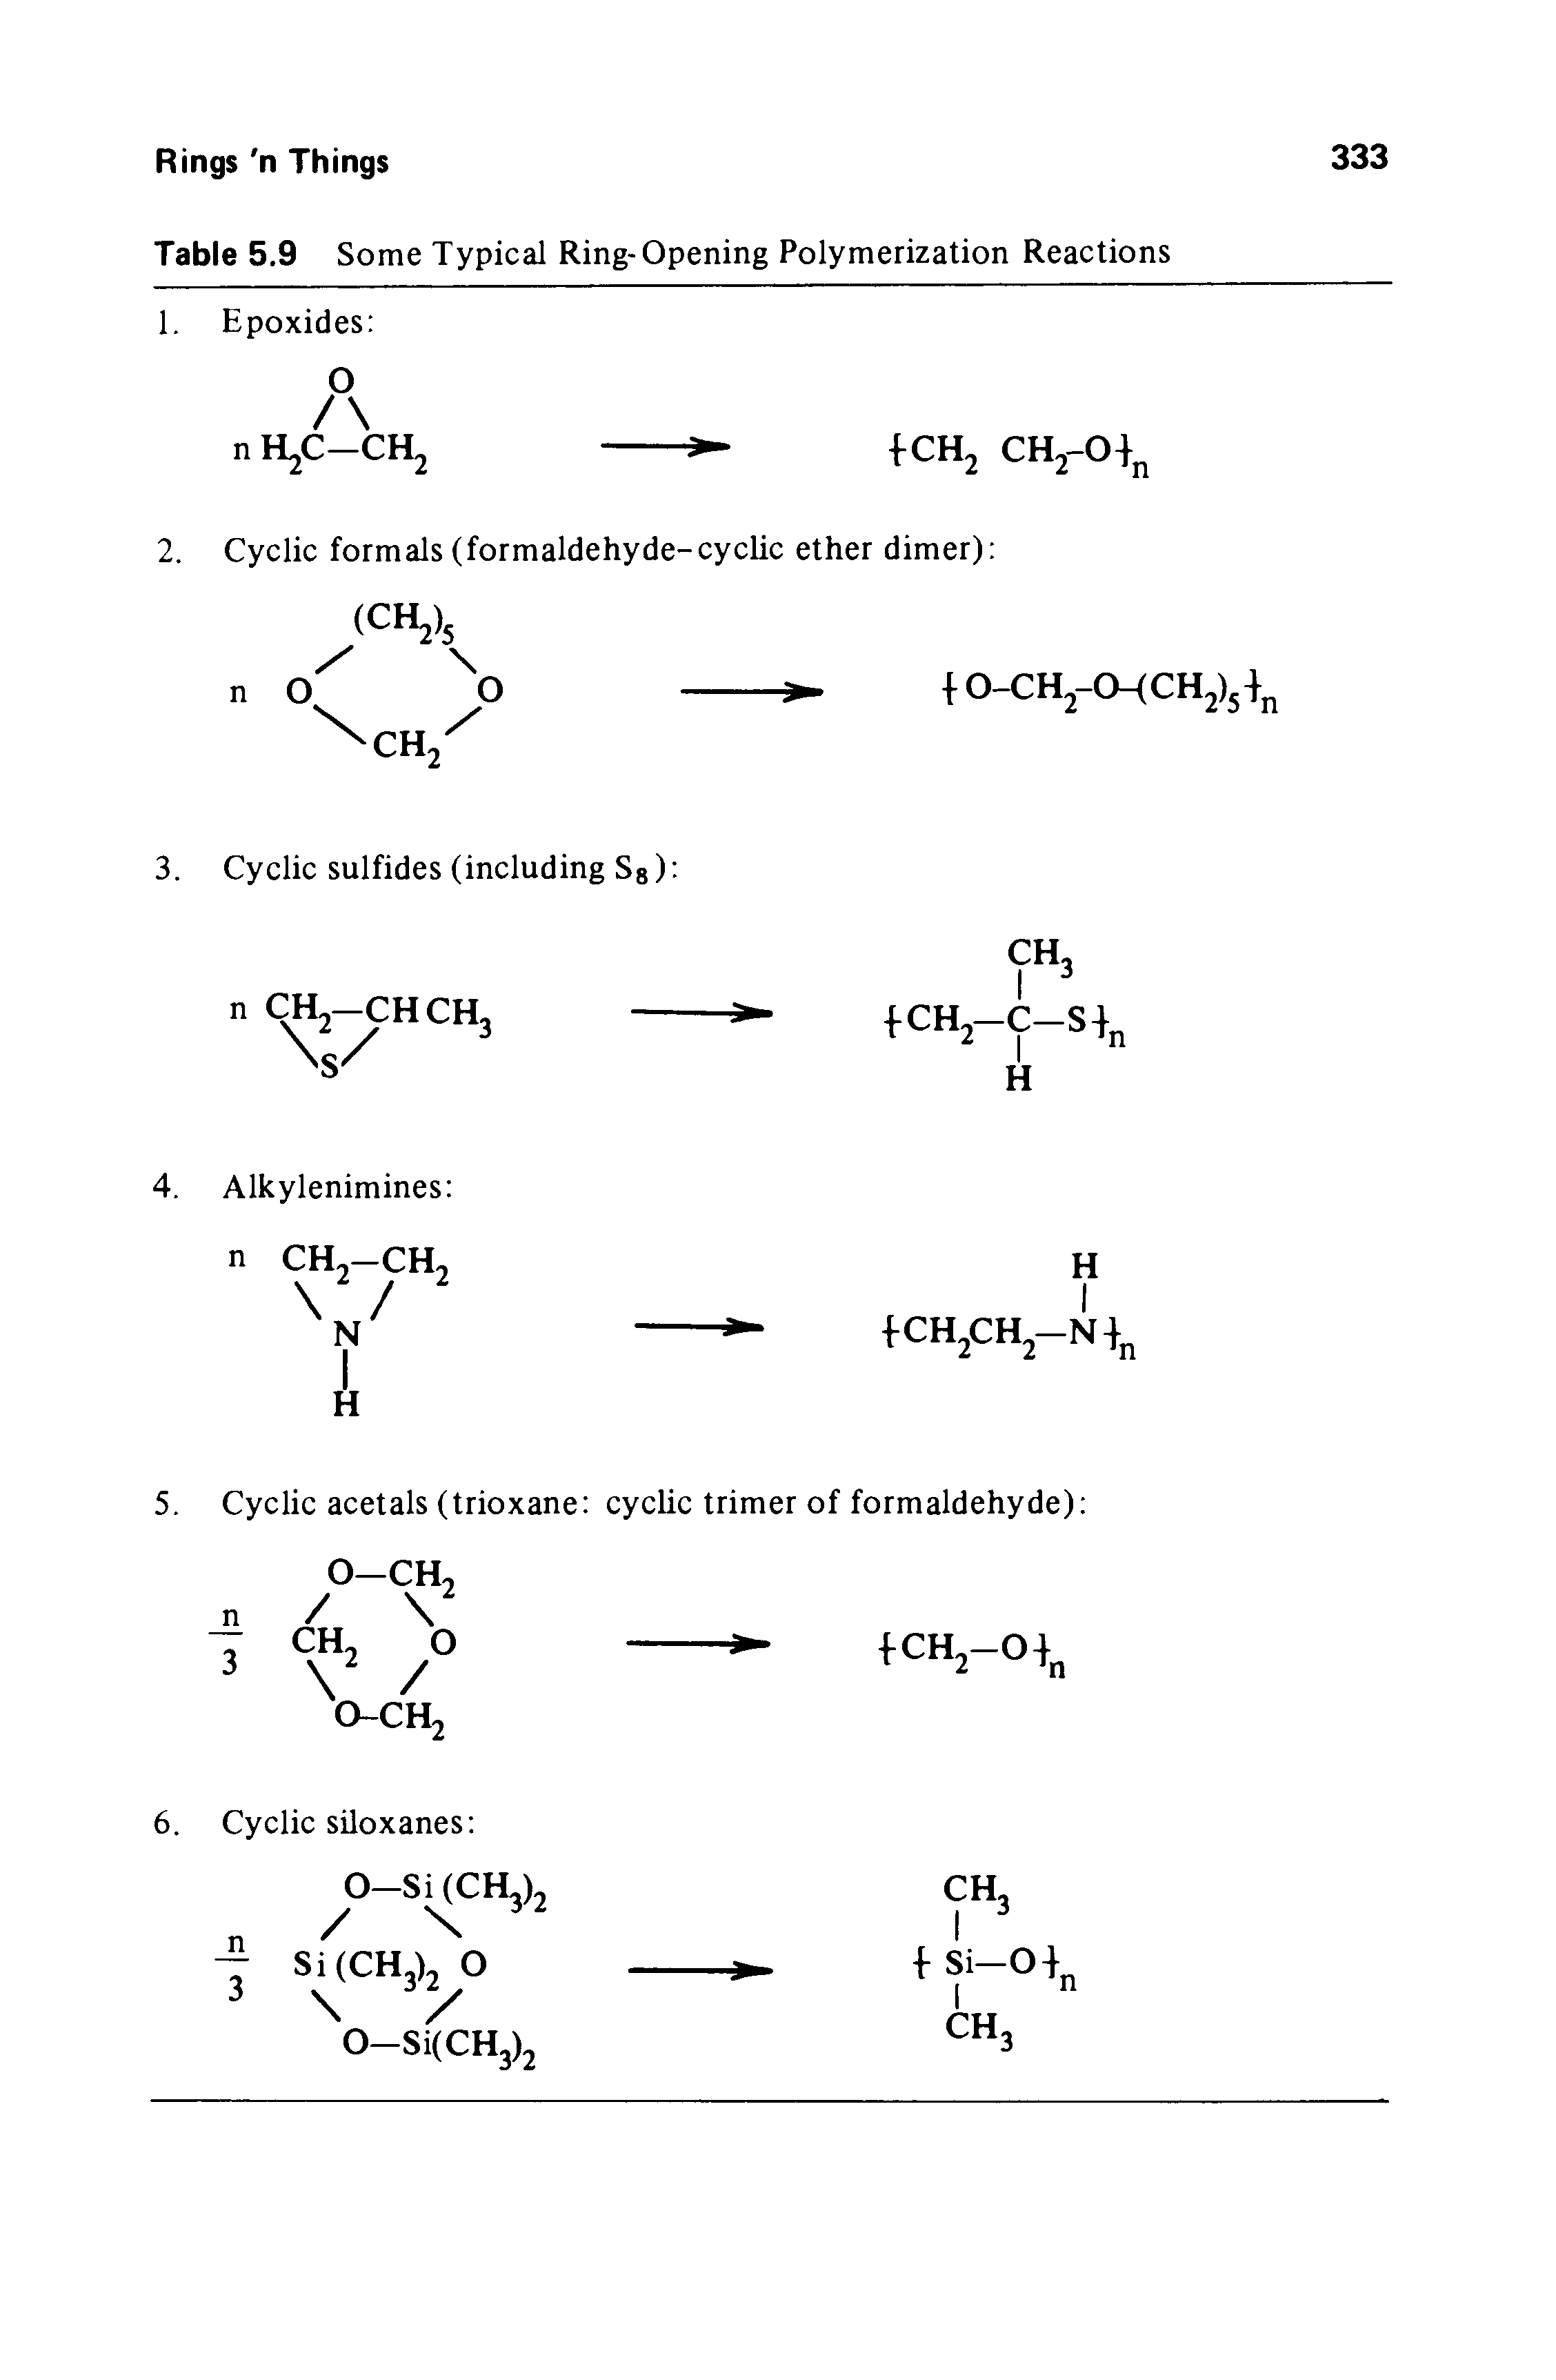 Table 5.9 Some Typical Ring-Opening Polymerization Reactions...